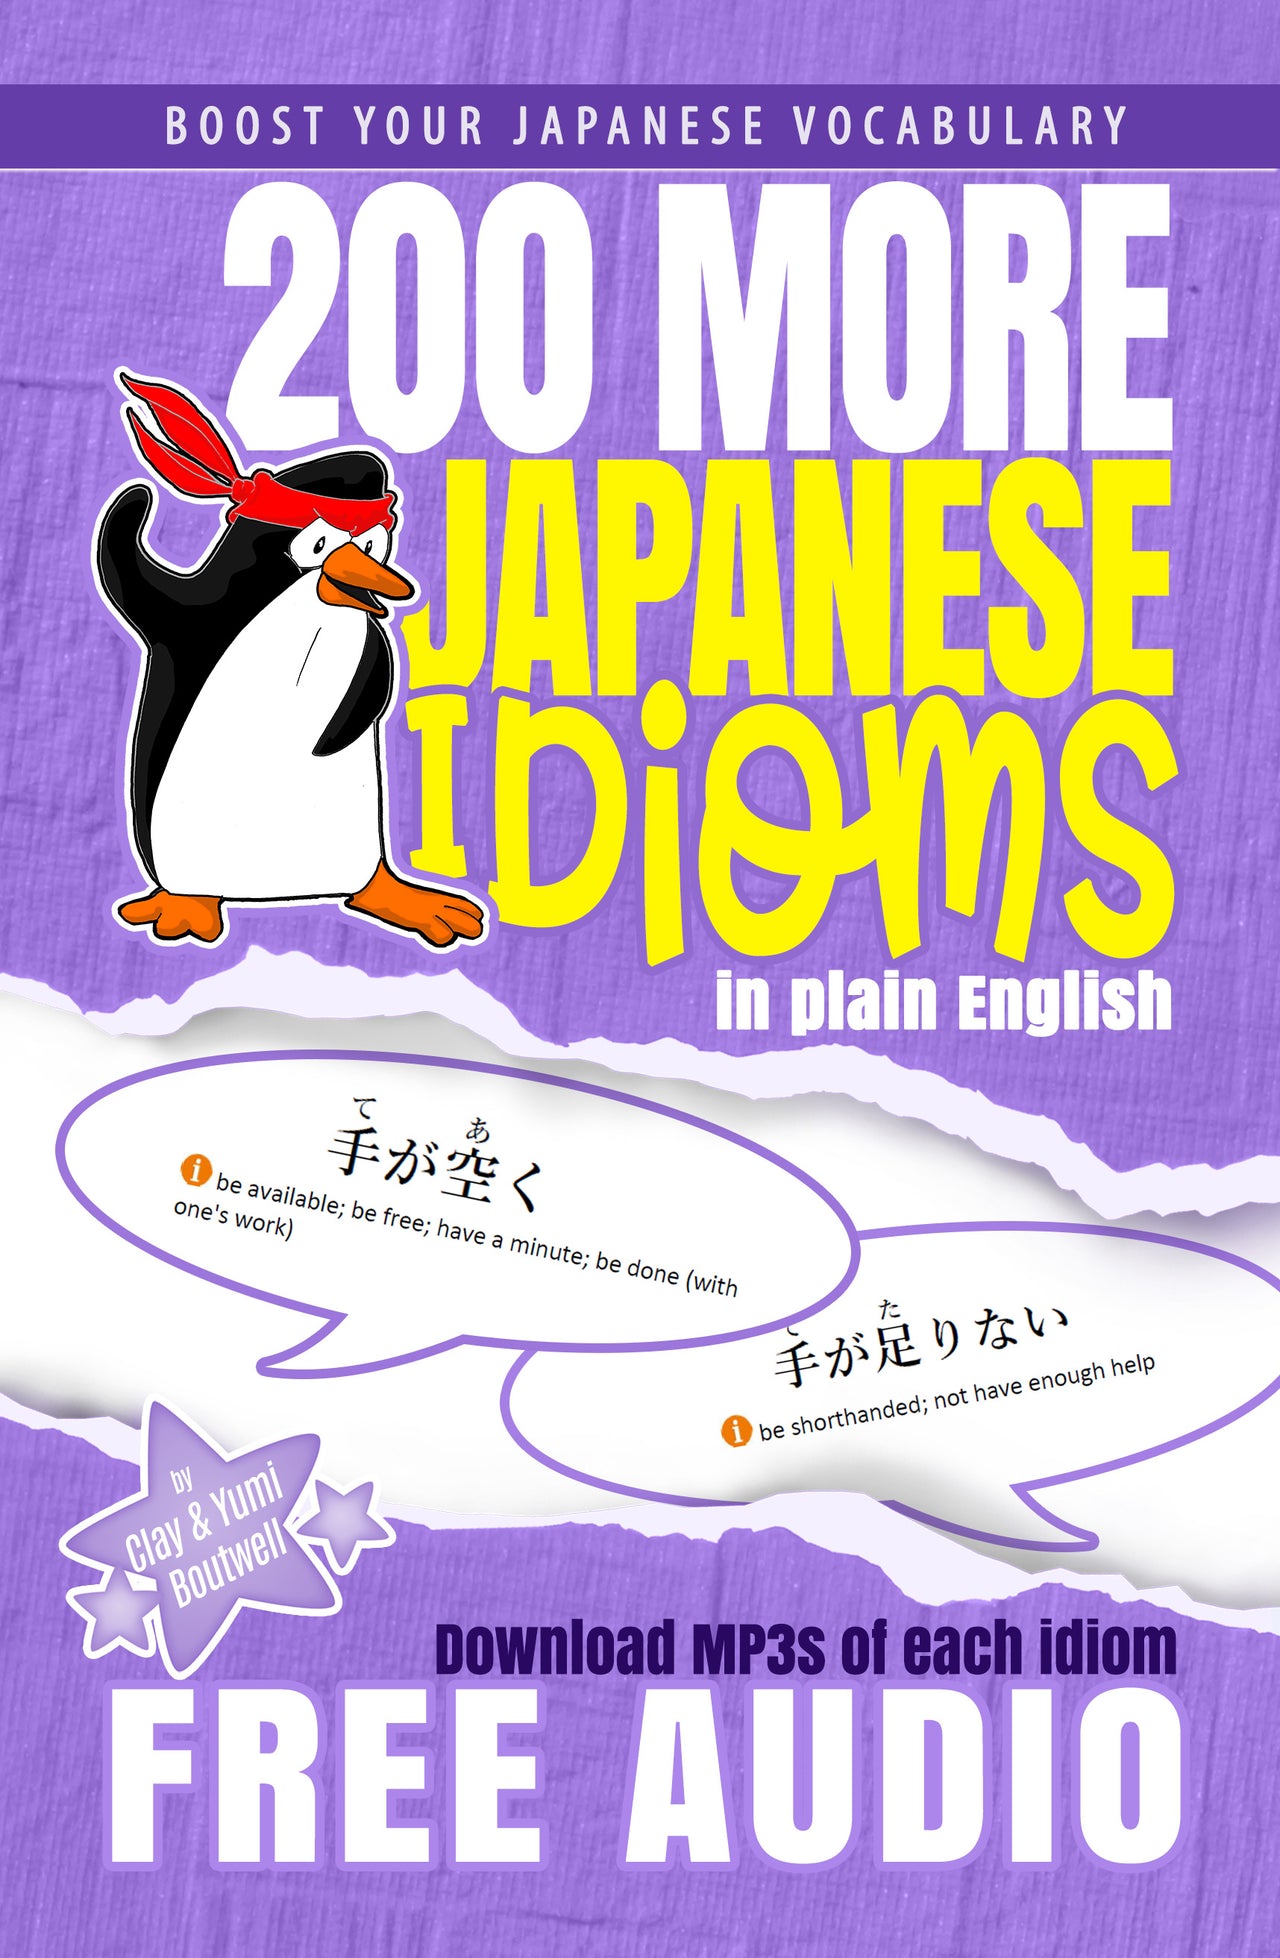 200 More Japanese Idioms in Plain English [Paperback + Digital Download] - The Japan Shop